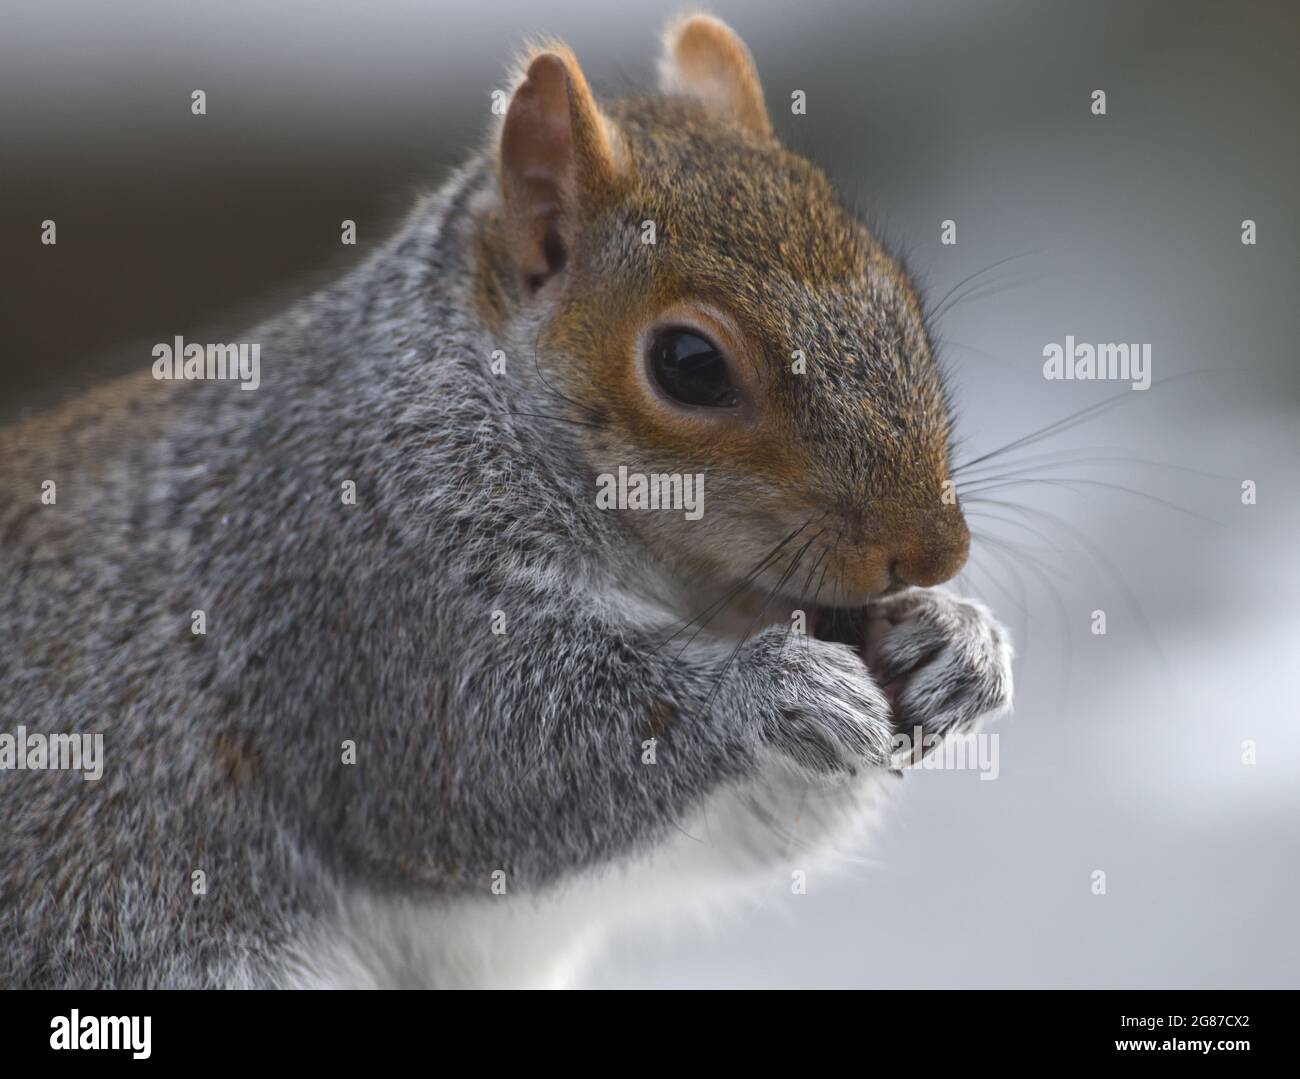 A grey squirrel (Sciurus carolinensis) take advantage of food fallen from a bird feeder on a snowy afternoon. Bedgebury Forest, Kent. UK. Stock Photo